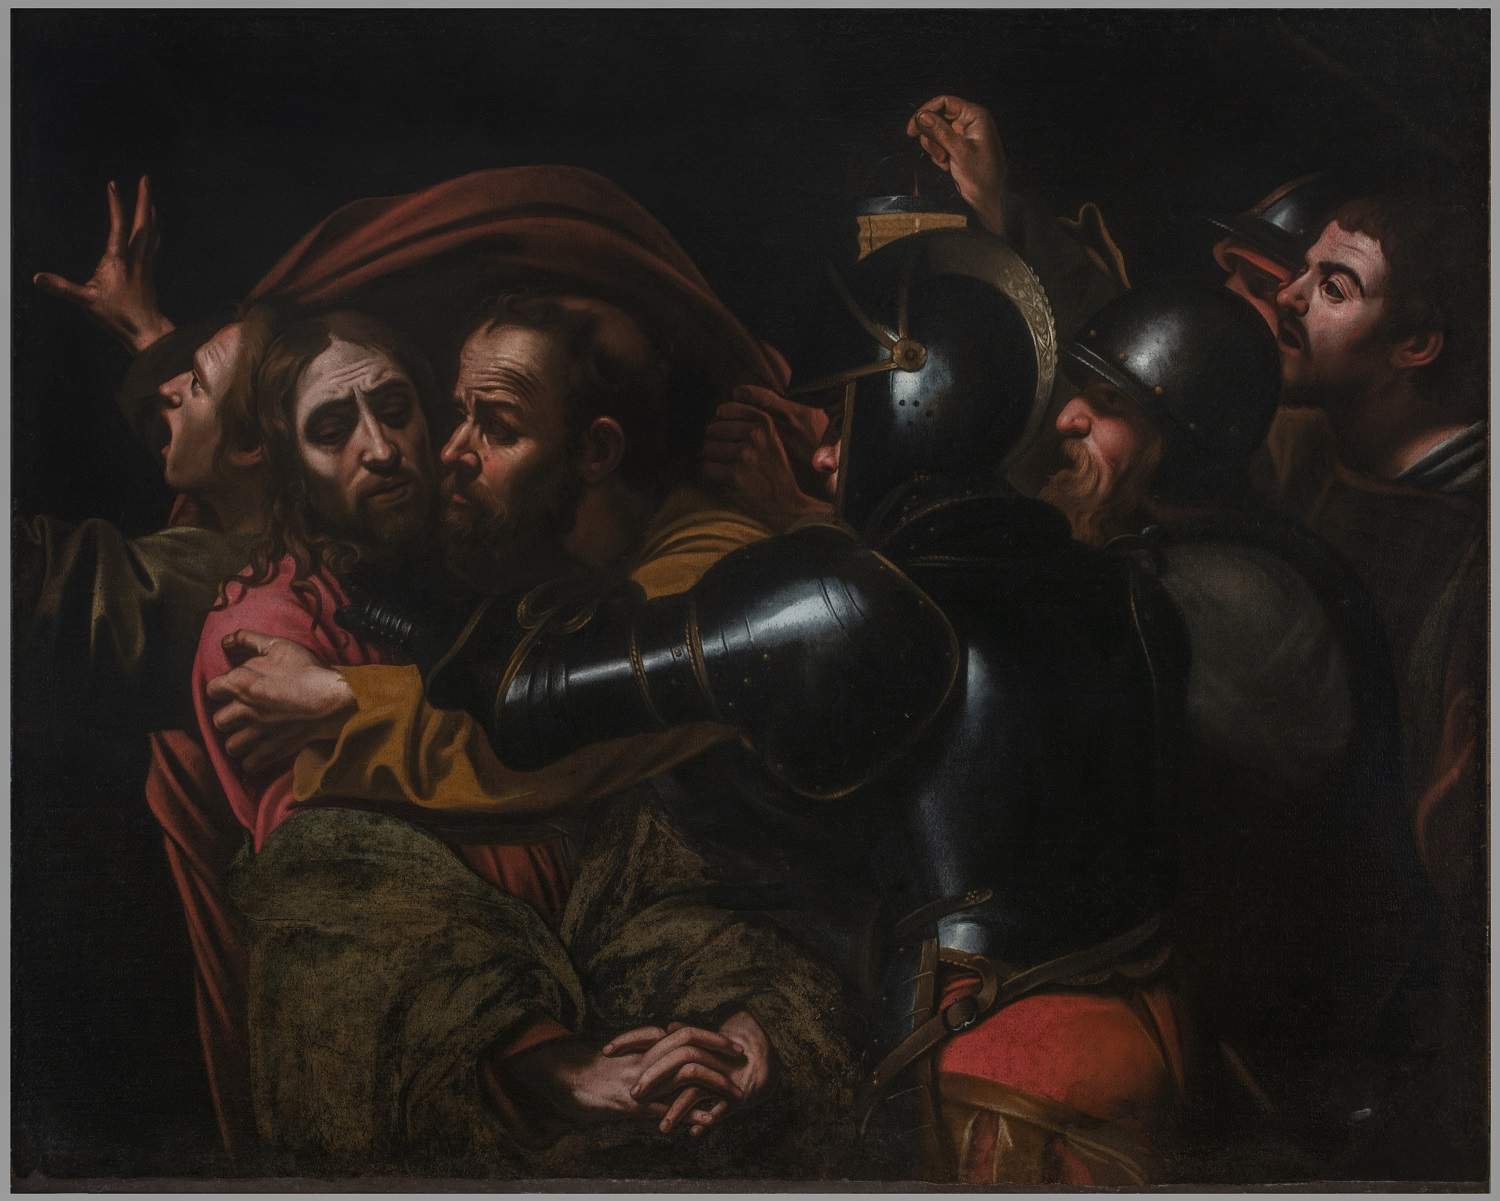 A copy of Caravaggio's The Capture of Christ resurfaces at Palazzo Pitti after decades of absence